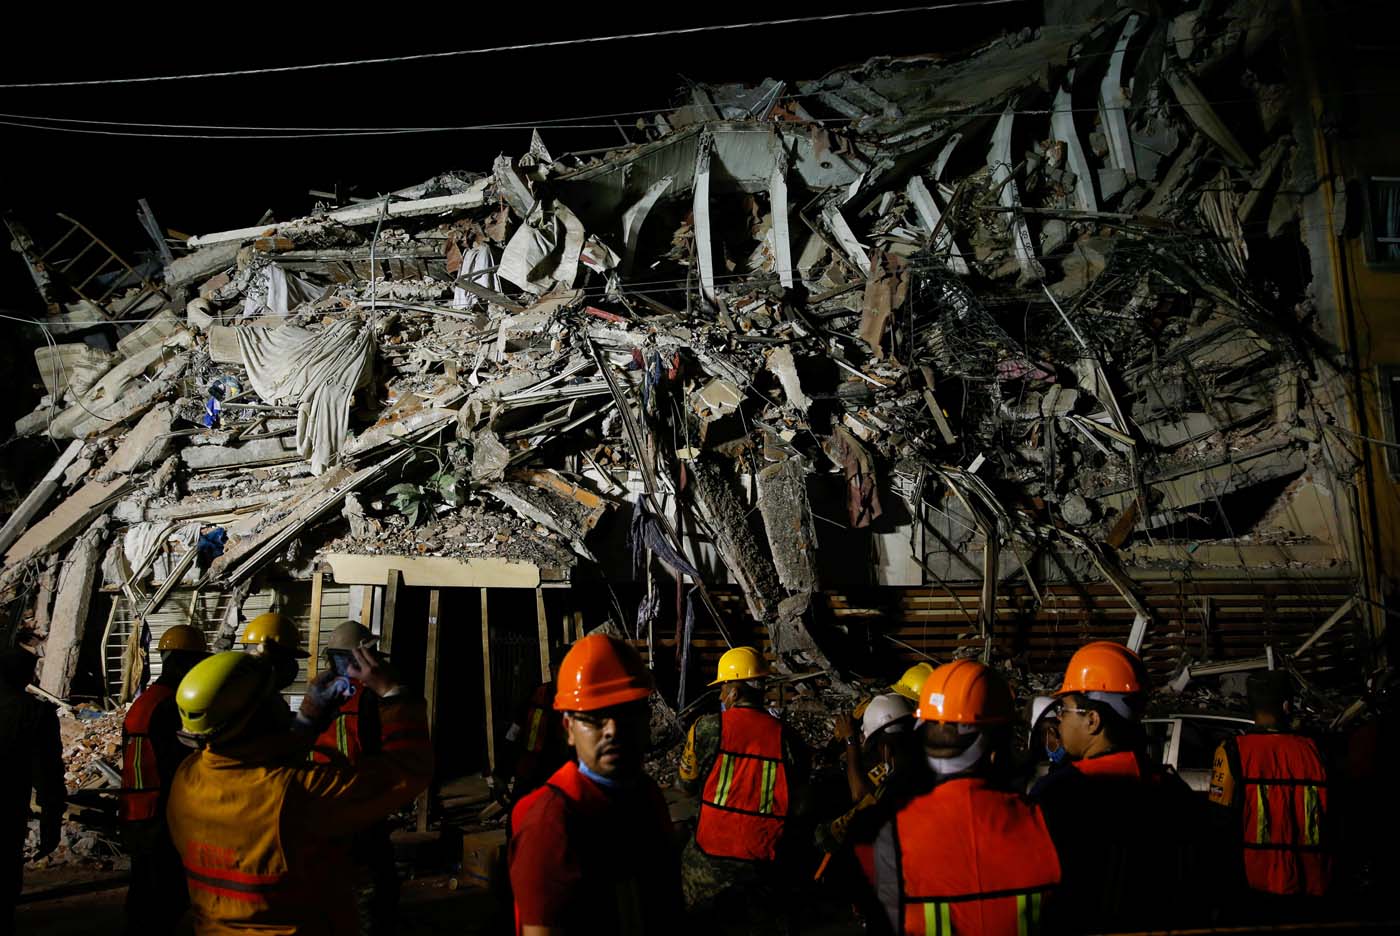 Rescuers work at a the site of a collapsed building after an earthquake in Mexico City, Mexico September 20, 2017. REUTERS/Henry Romero